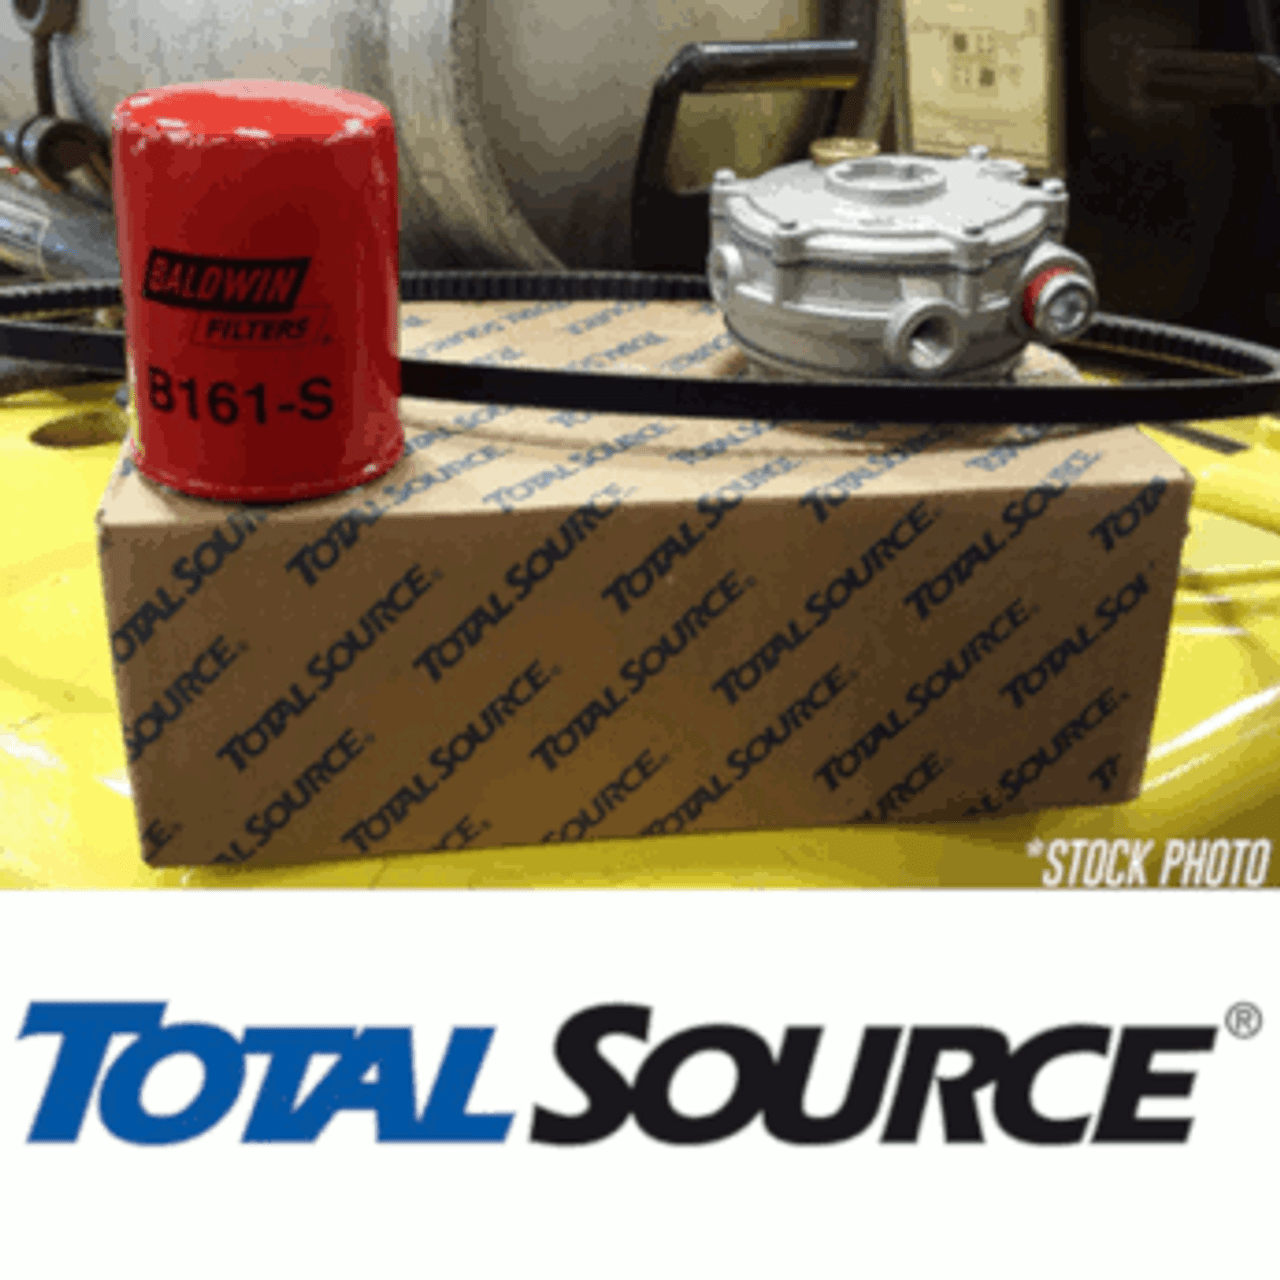 2000-085: Taylor Forklift LEVEL SIGHT GAGE 7 IN